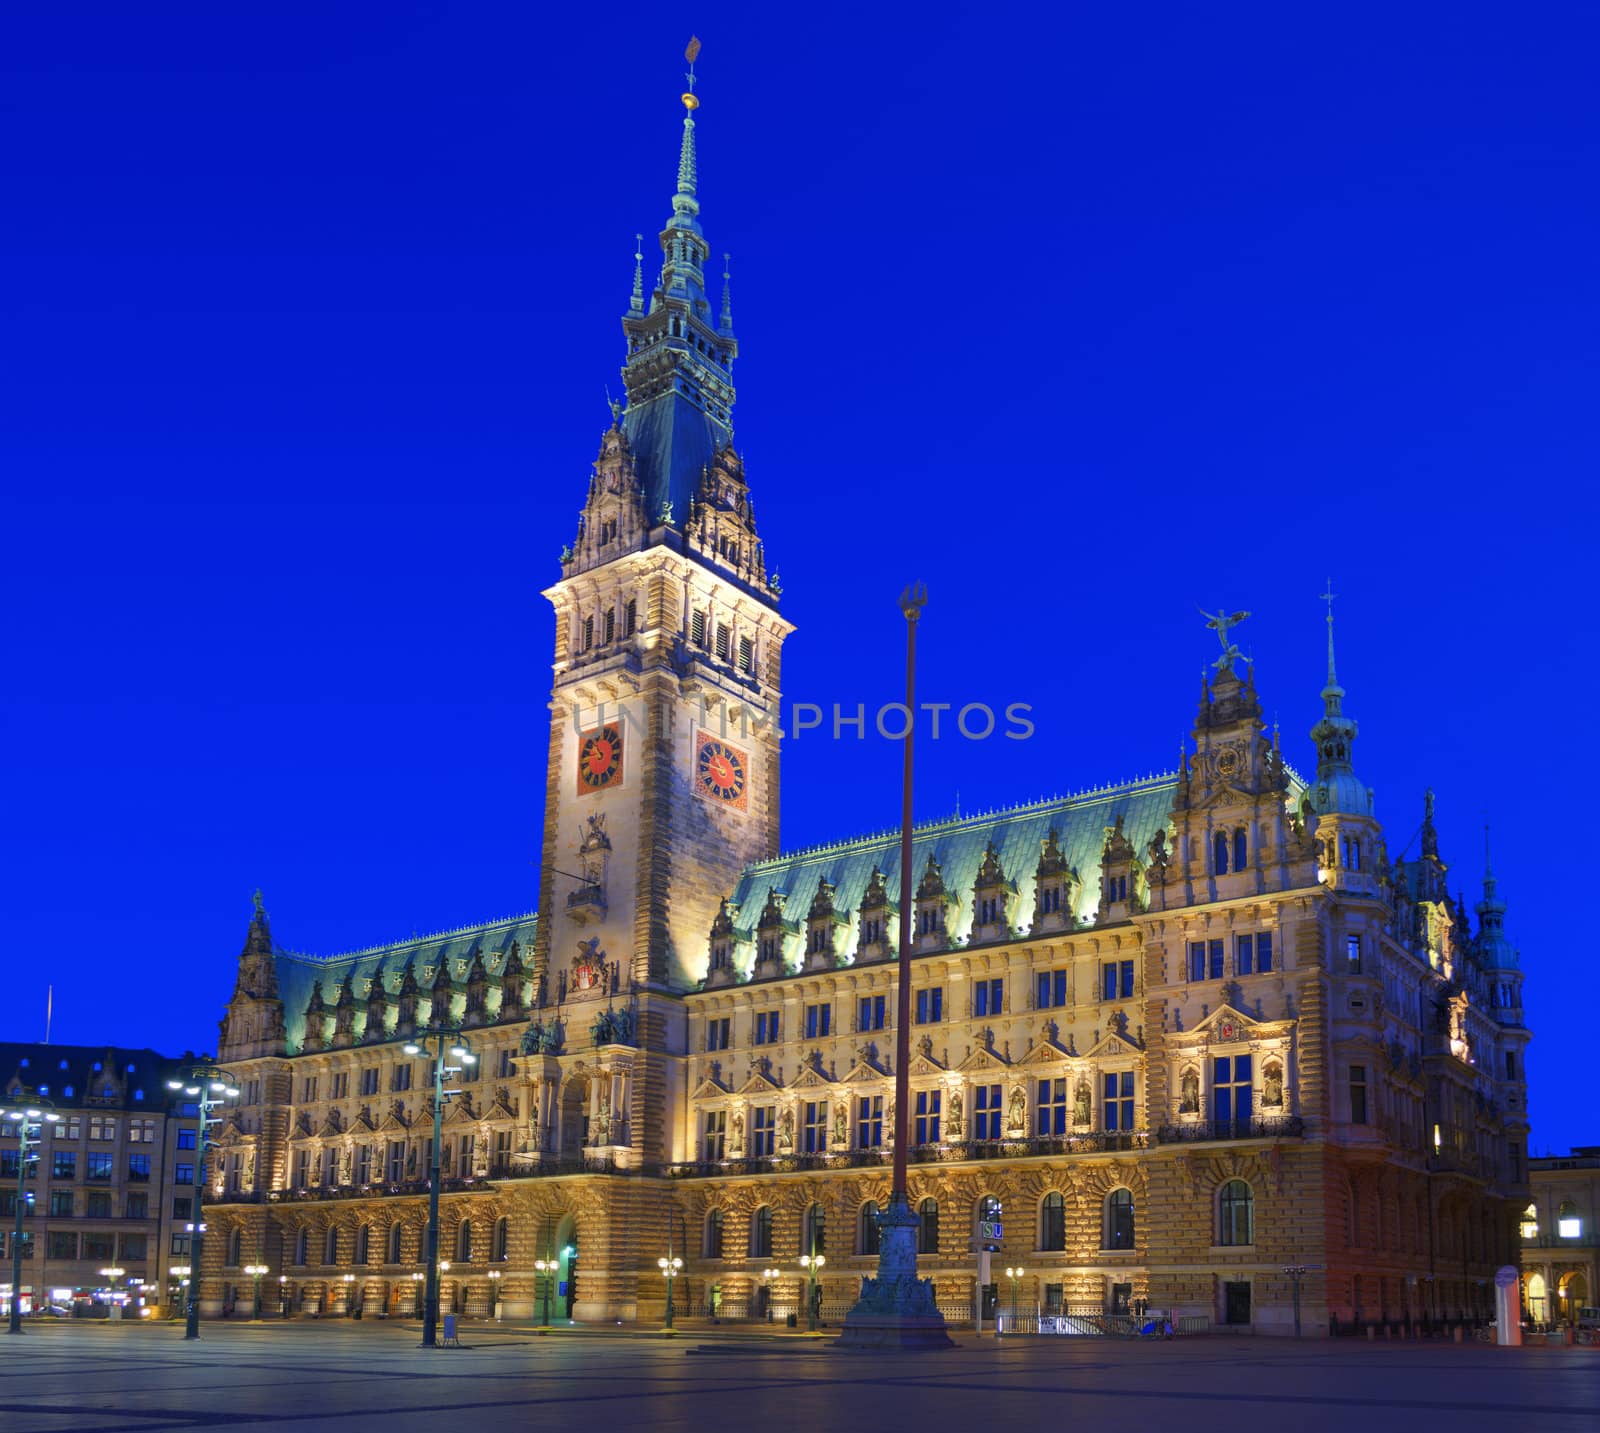 HDR image of the town hall of Hamburg, Germany. Building began in 1884 and was completed in 1897. The architectural style is neo-renaissance. It is one of the few completely preserved buildings of historicism in Hamburg. Composition of several exposures.